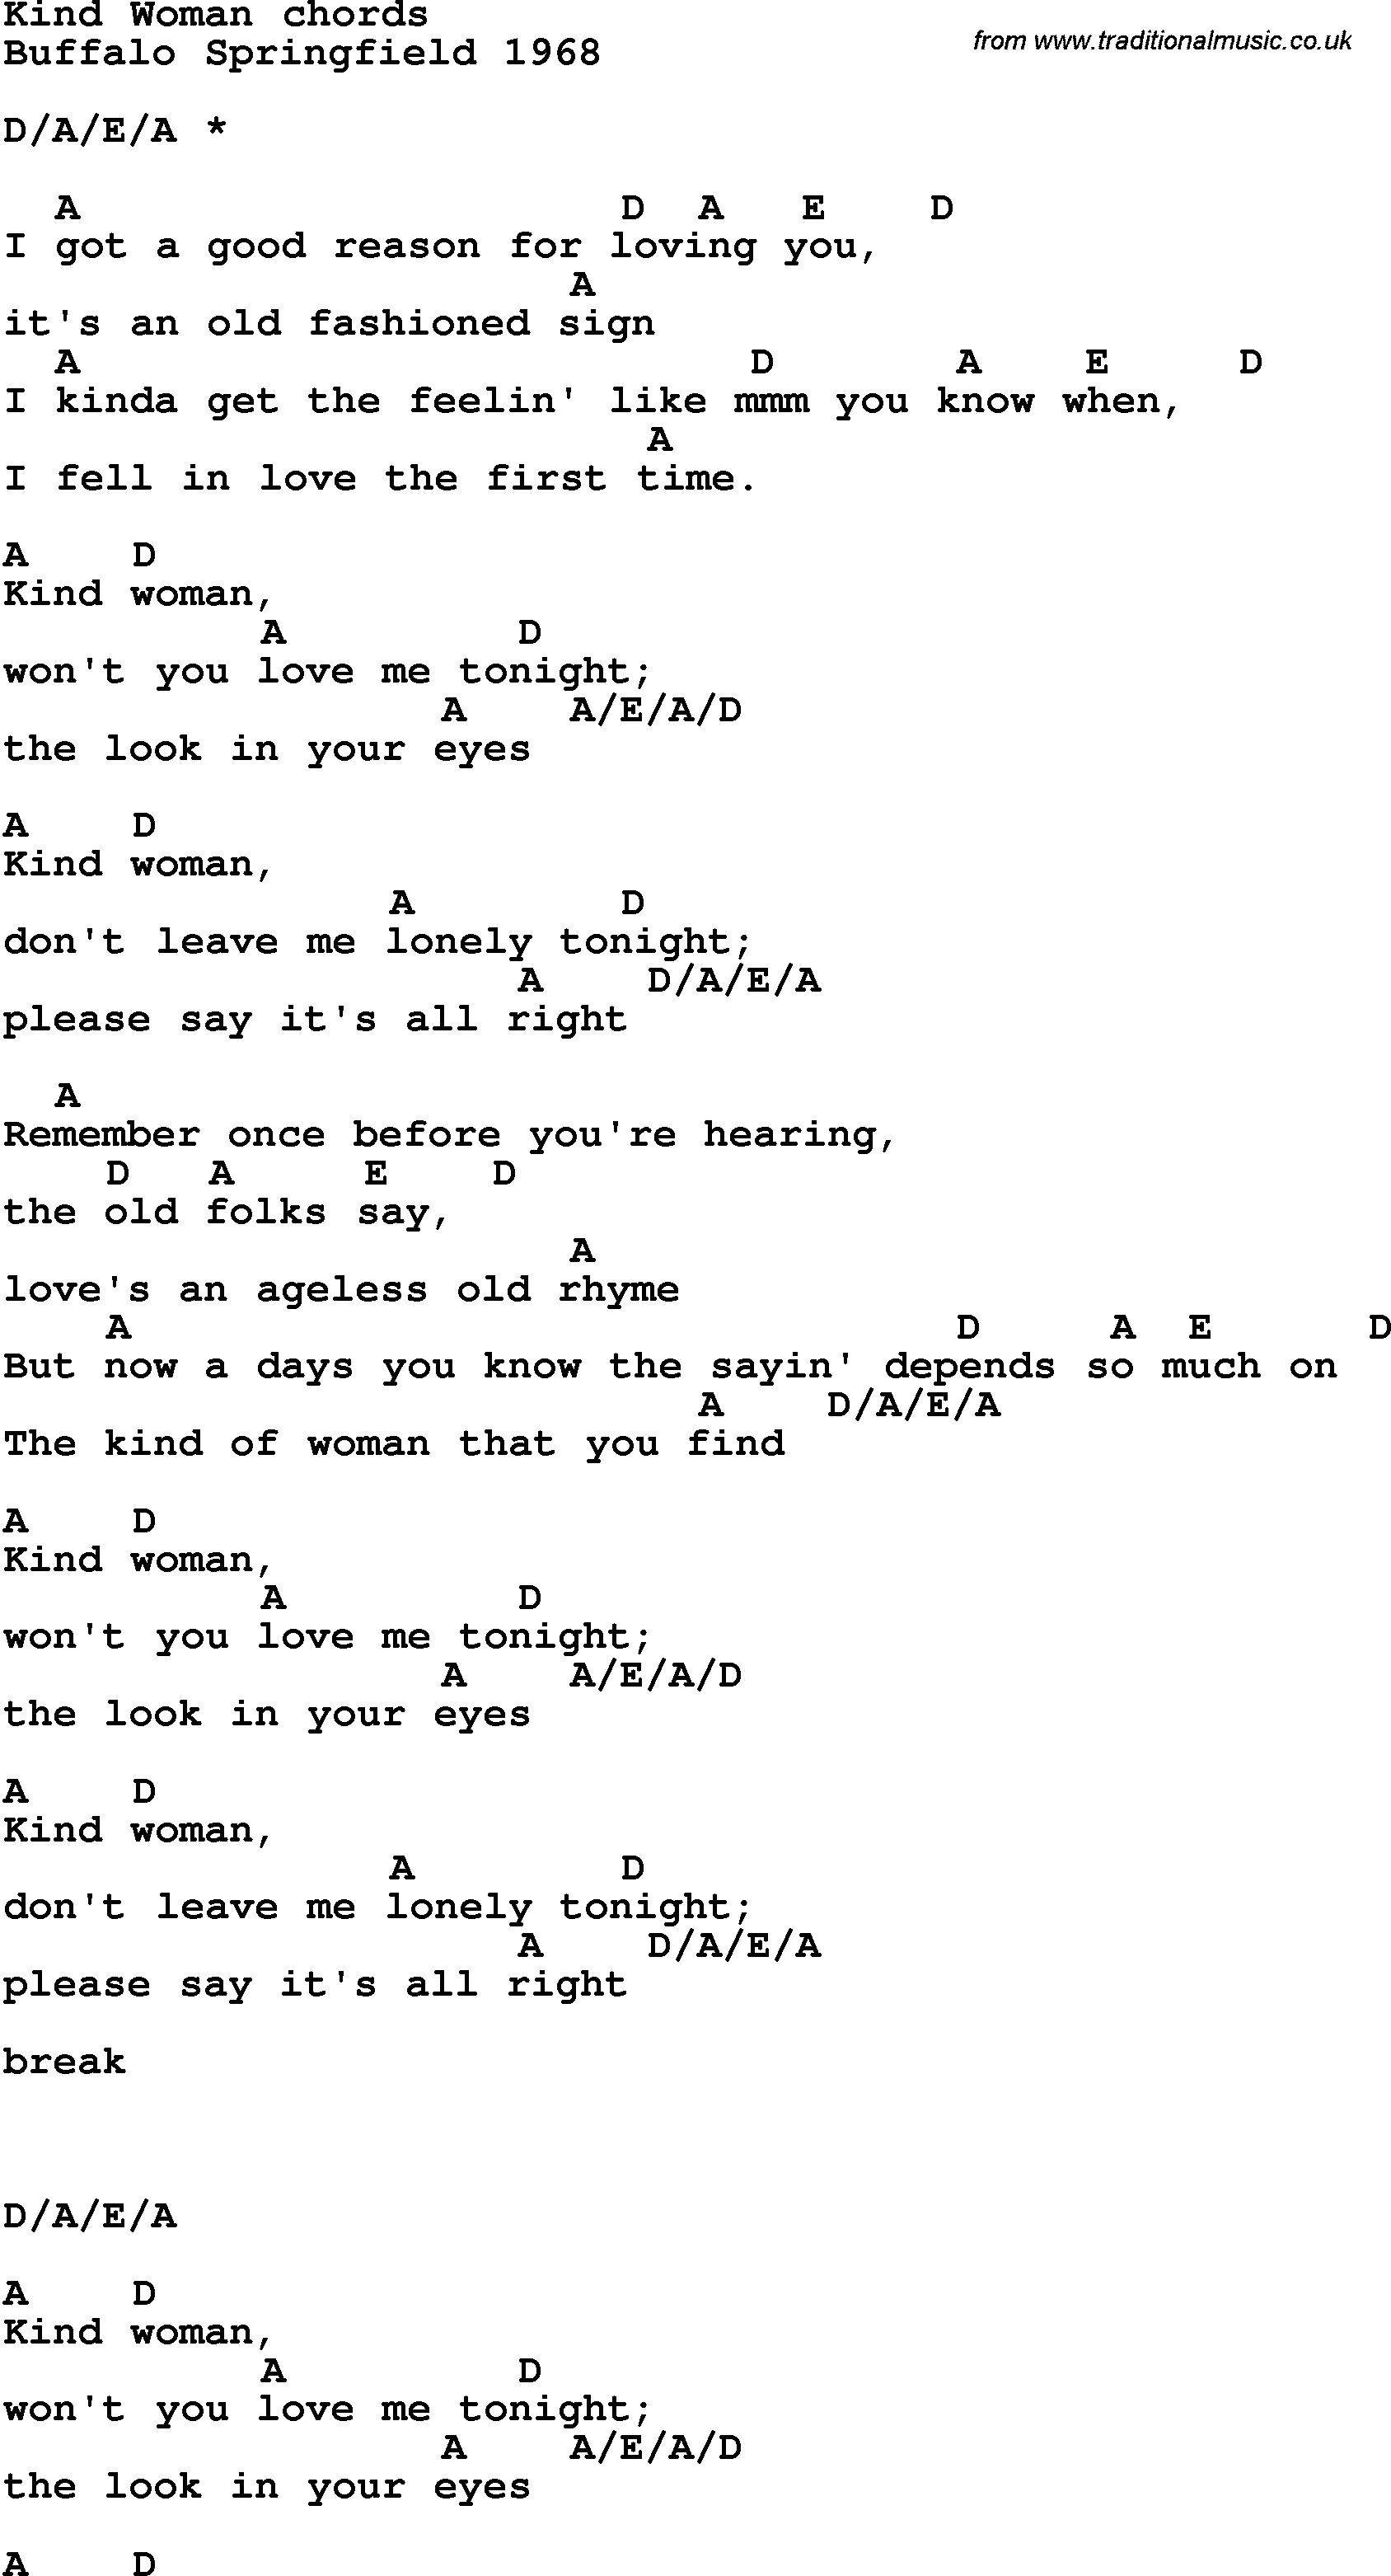 Song Lyrics with guitar chords for Kind Woman